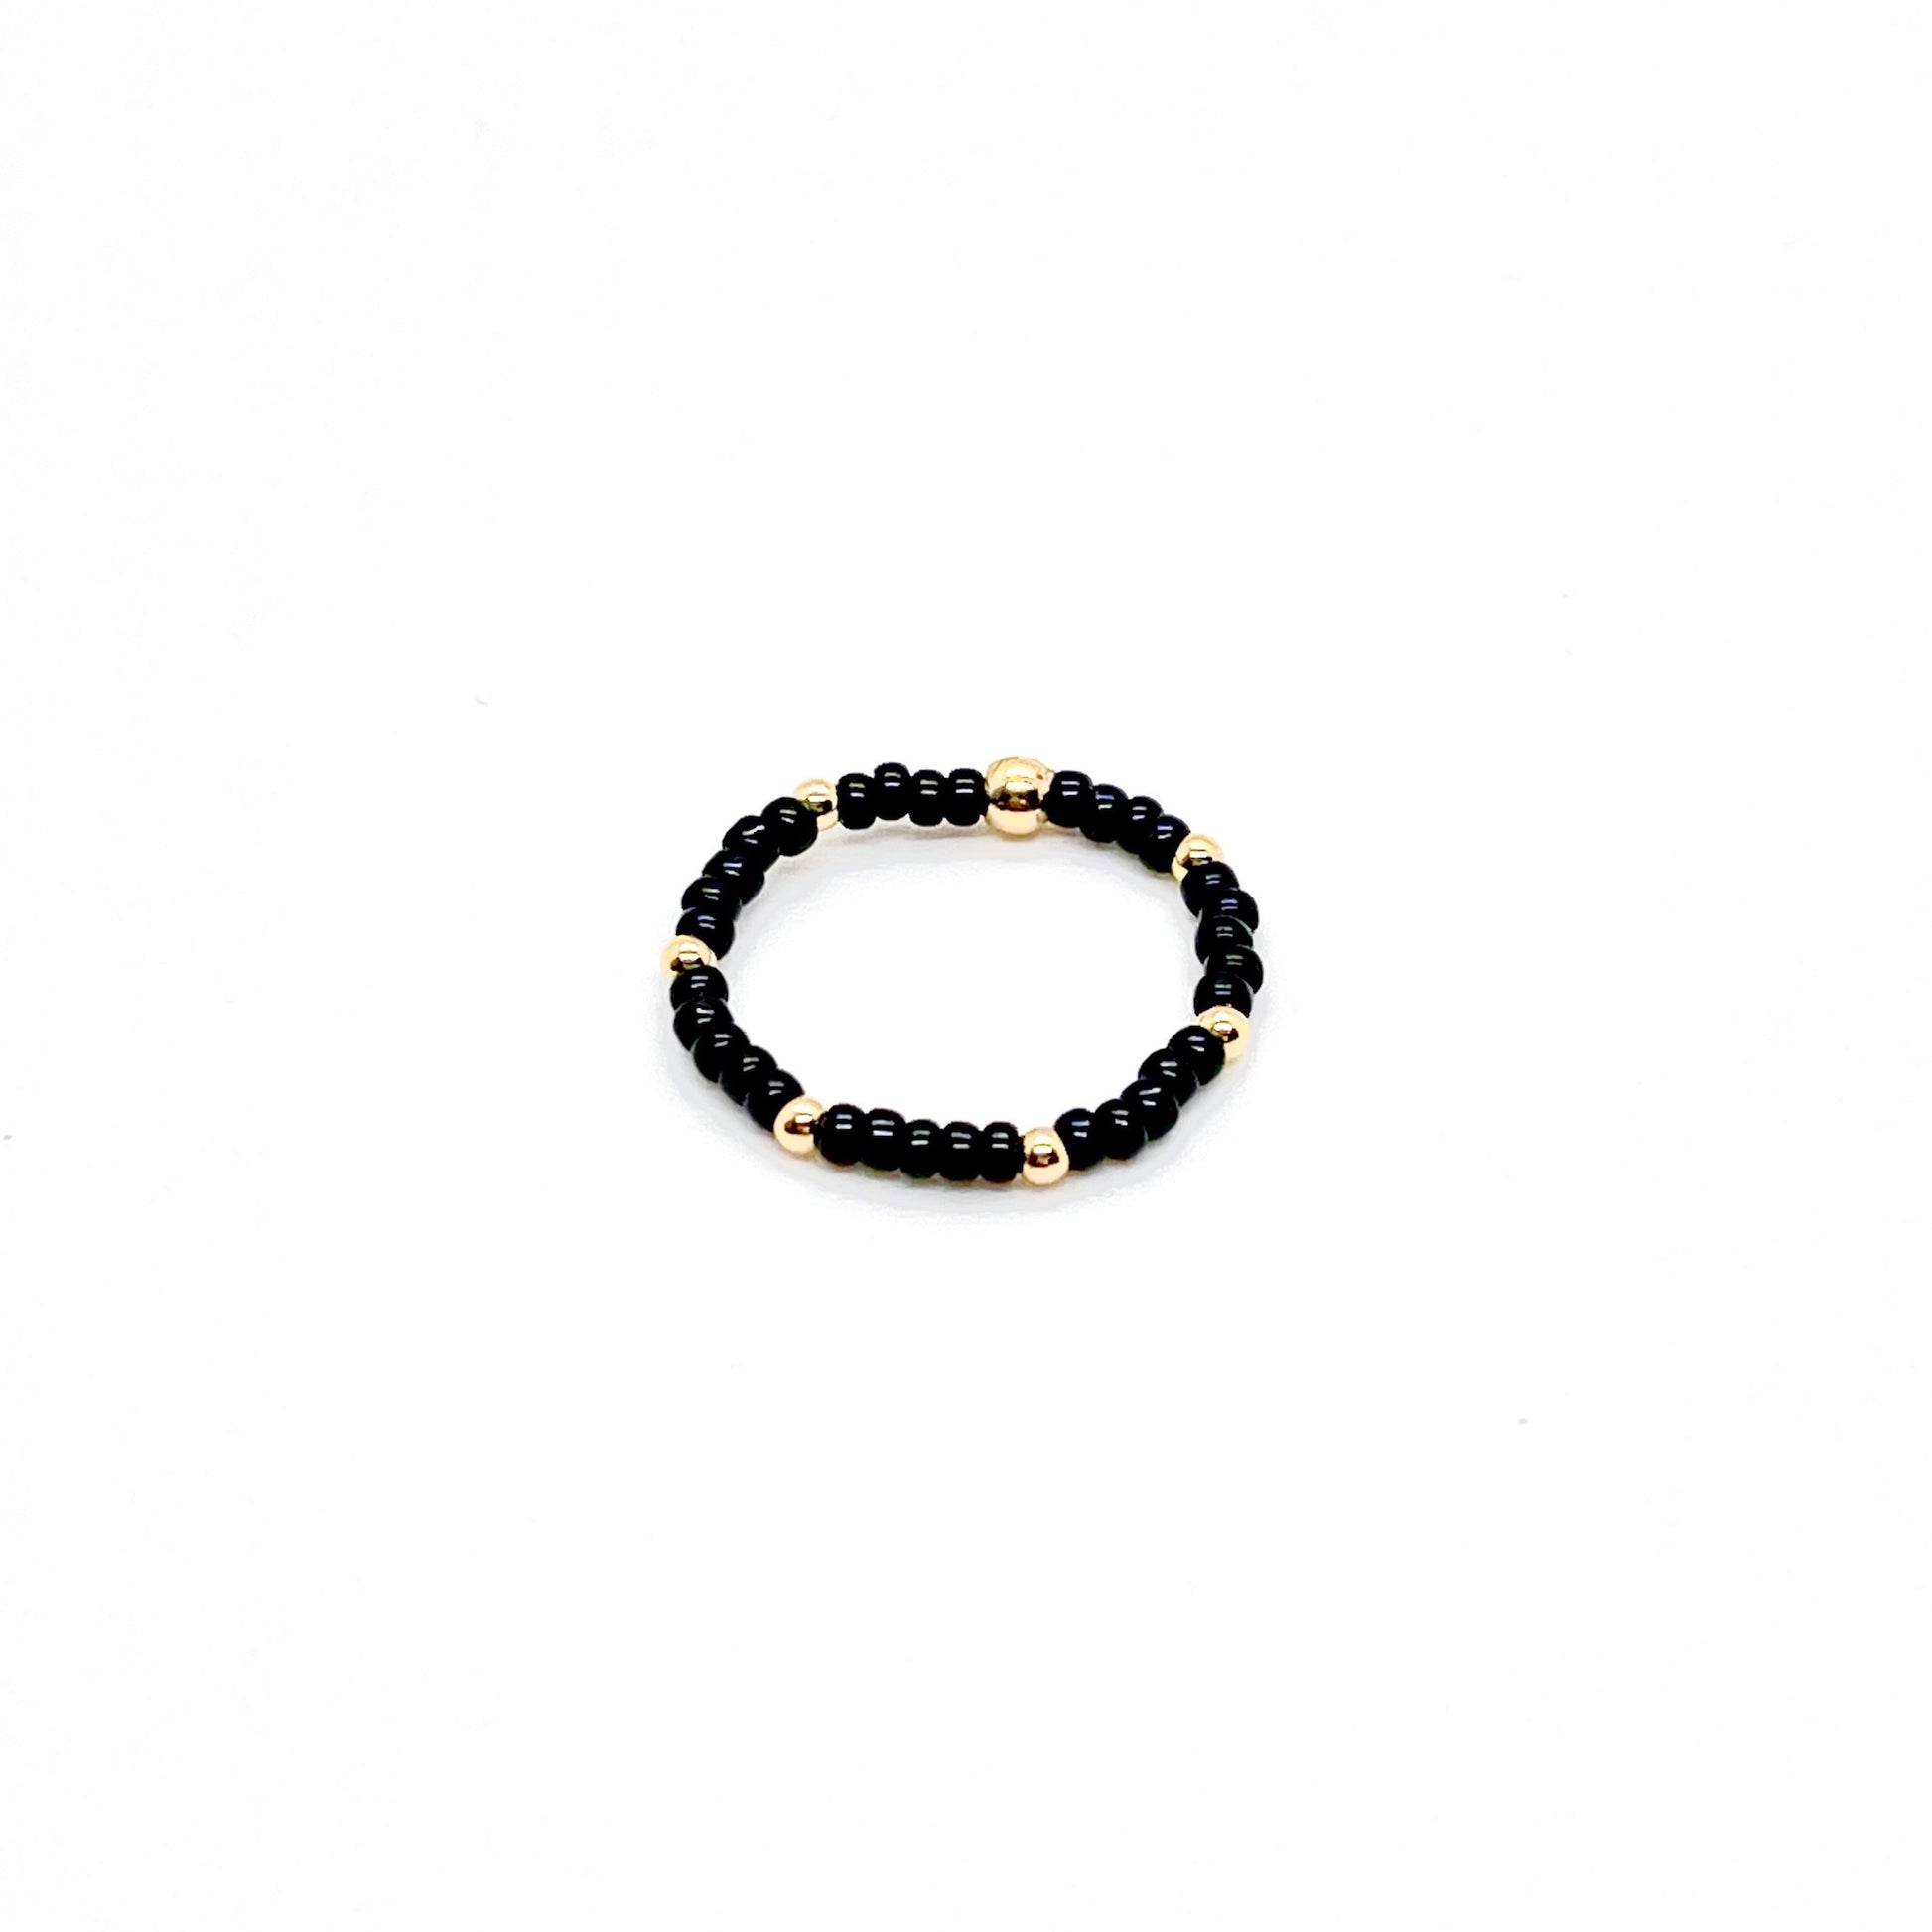 Stretch ring | Black seed bead ring with 2mm 14k gold filled accent ball beads.